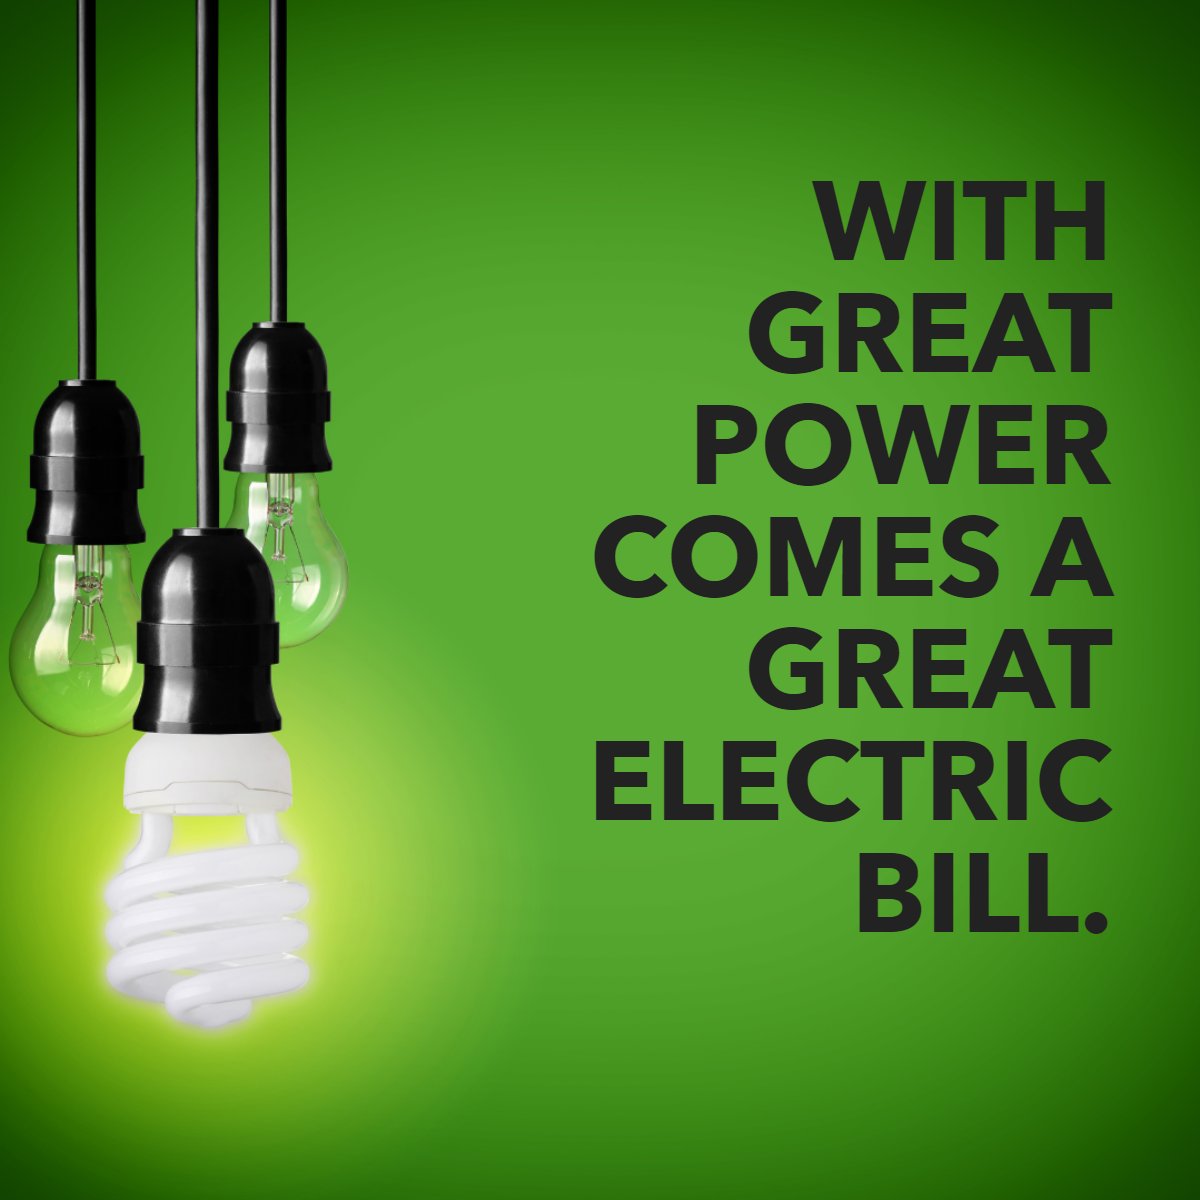 With great power... Comes great electric bill! 🤣

#RealEstateMeme #Listing #Seller #RealEstate 
 #realtorlifestyle #realtorlife
 #realestate #homeforsale #housegoals #househunting #minnesotarealestate #twincitiesrealestate #stpaulrealestate #homebuyer #realestateagent